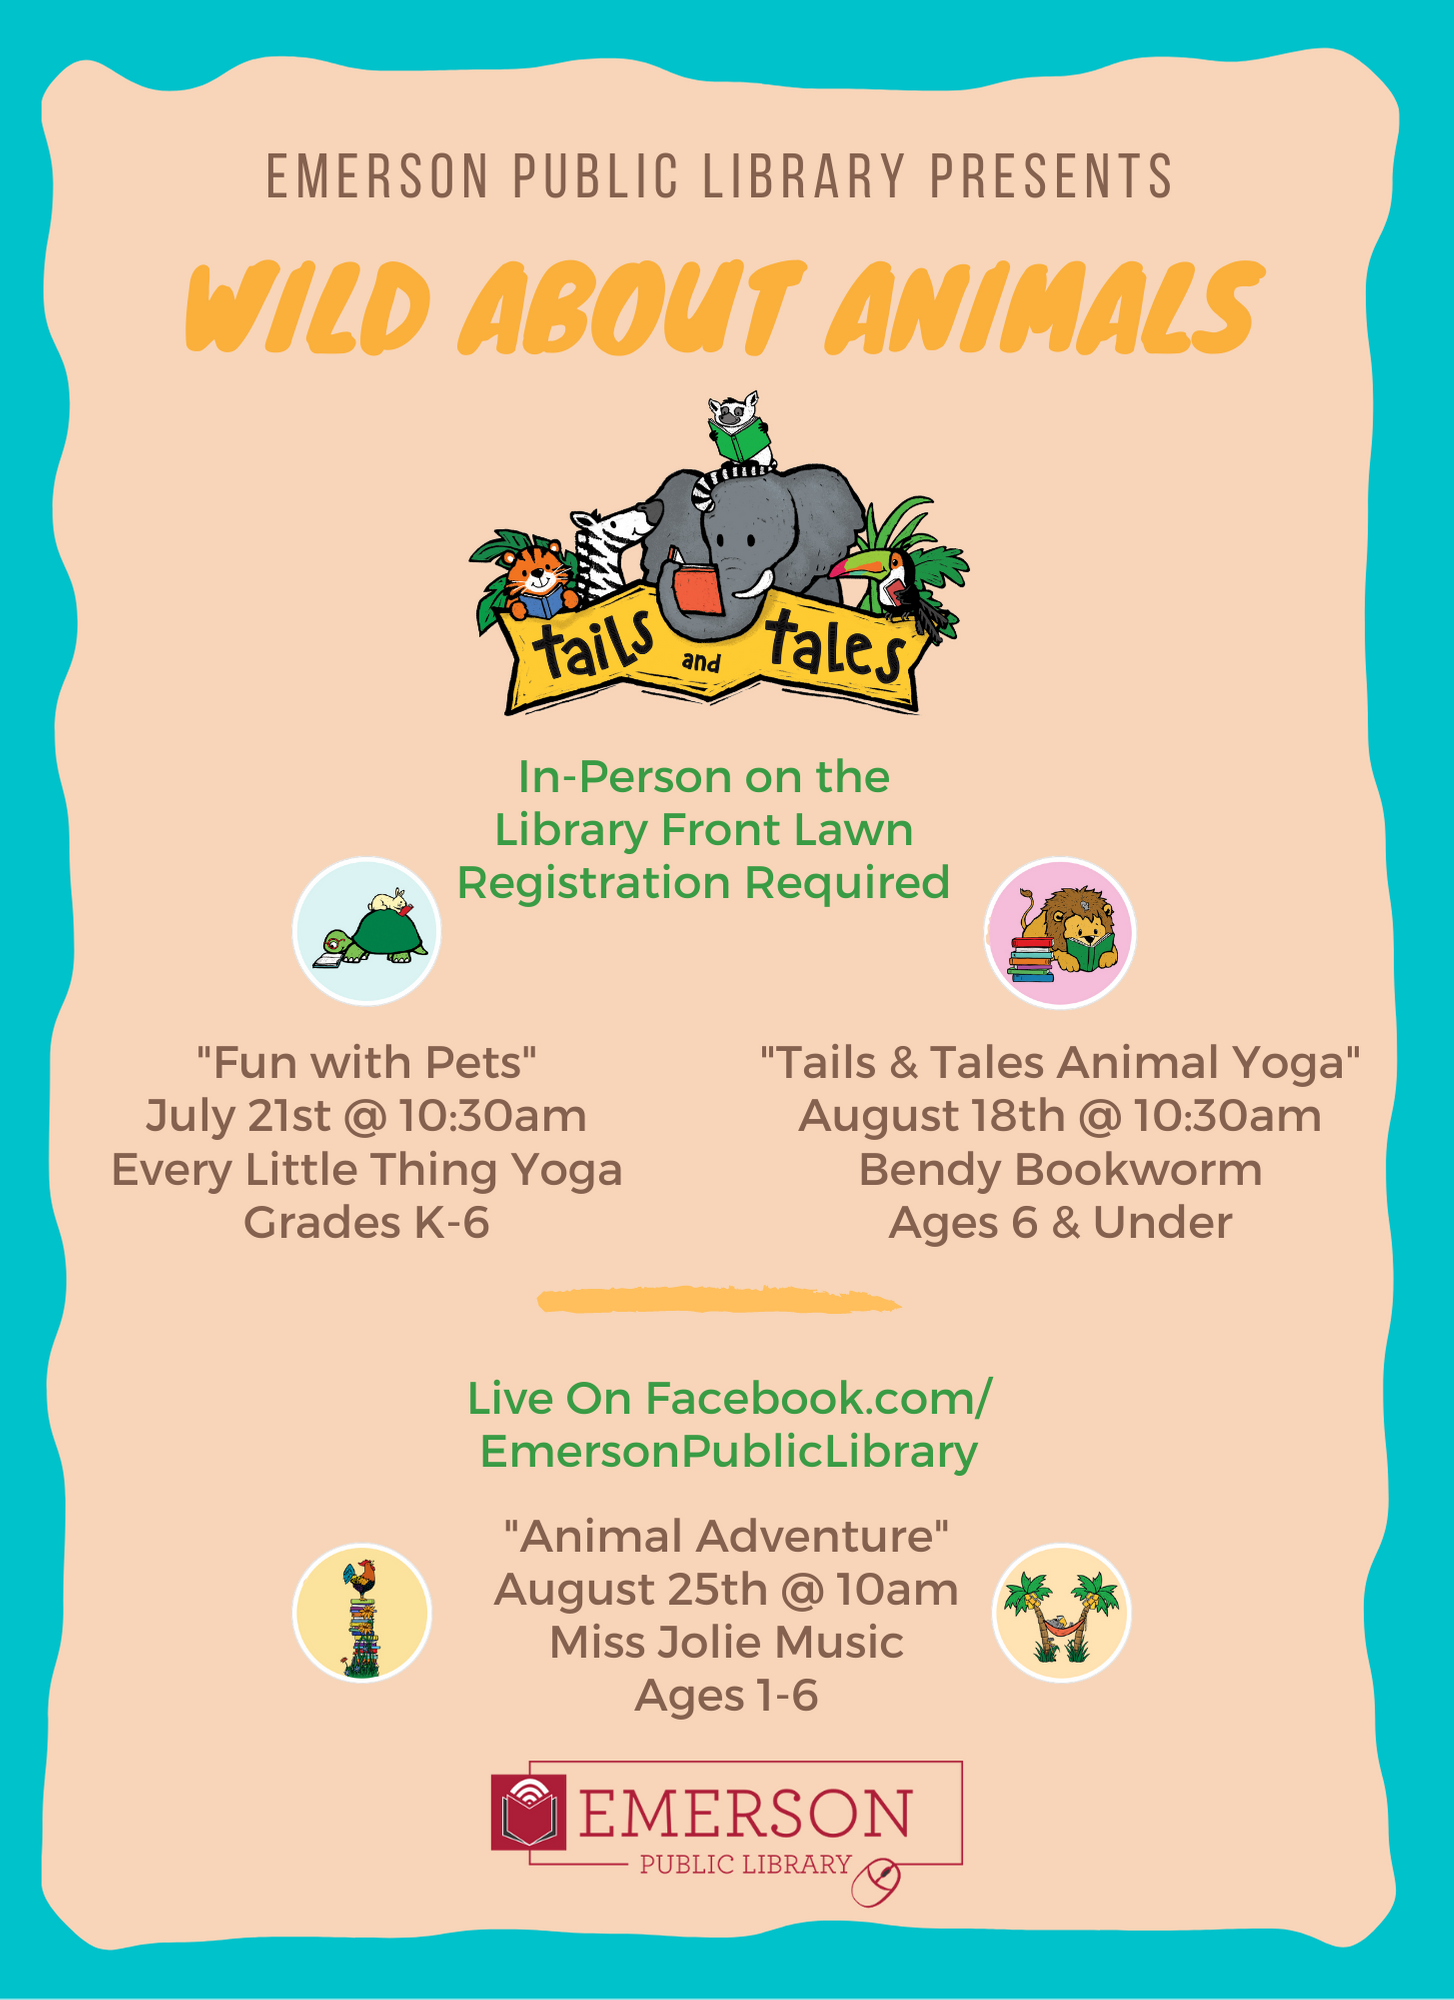 Every Little Thing Yoga: Fun with Pets Yoga!, Outdoors - Grades K-6 —  Emerson Public Library of Bergen County